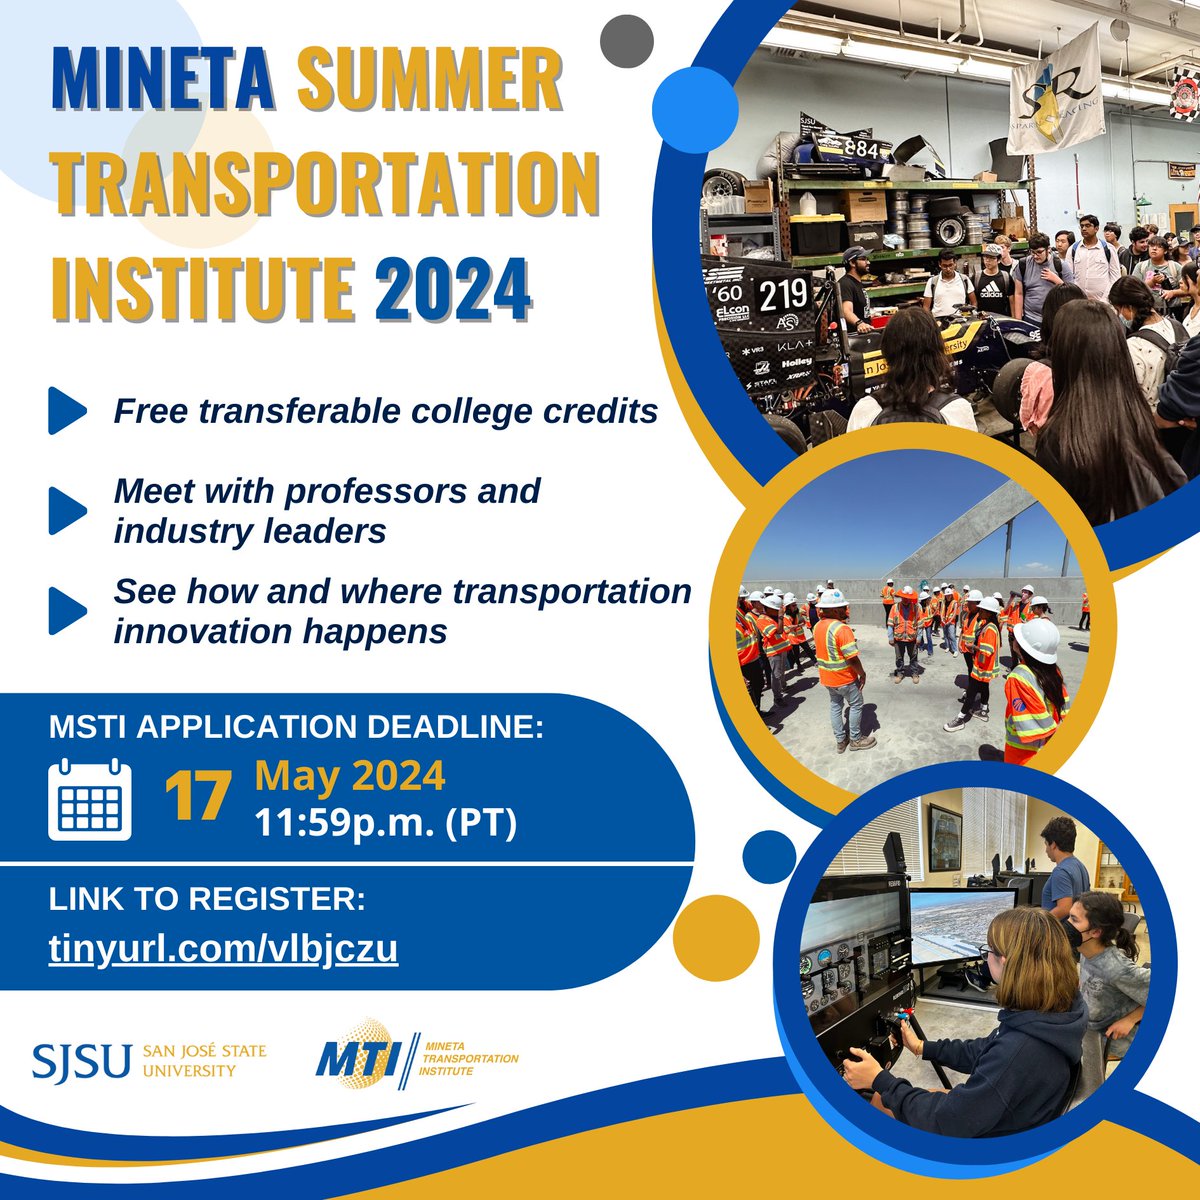 Autonomous vehicles? Check. Aviation? Check. High-speed rail? Yep. Explore transportation through hands-on STEM activities and excursions while earning college credits. Did we mention it’s free? High-school students apply here: transweb.sjsu.edu/workforce-deve…